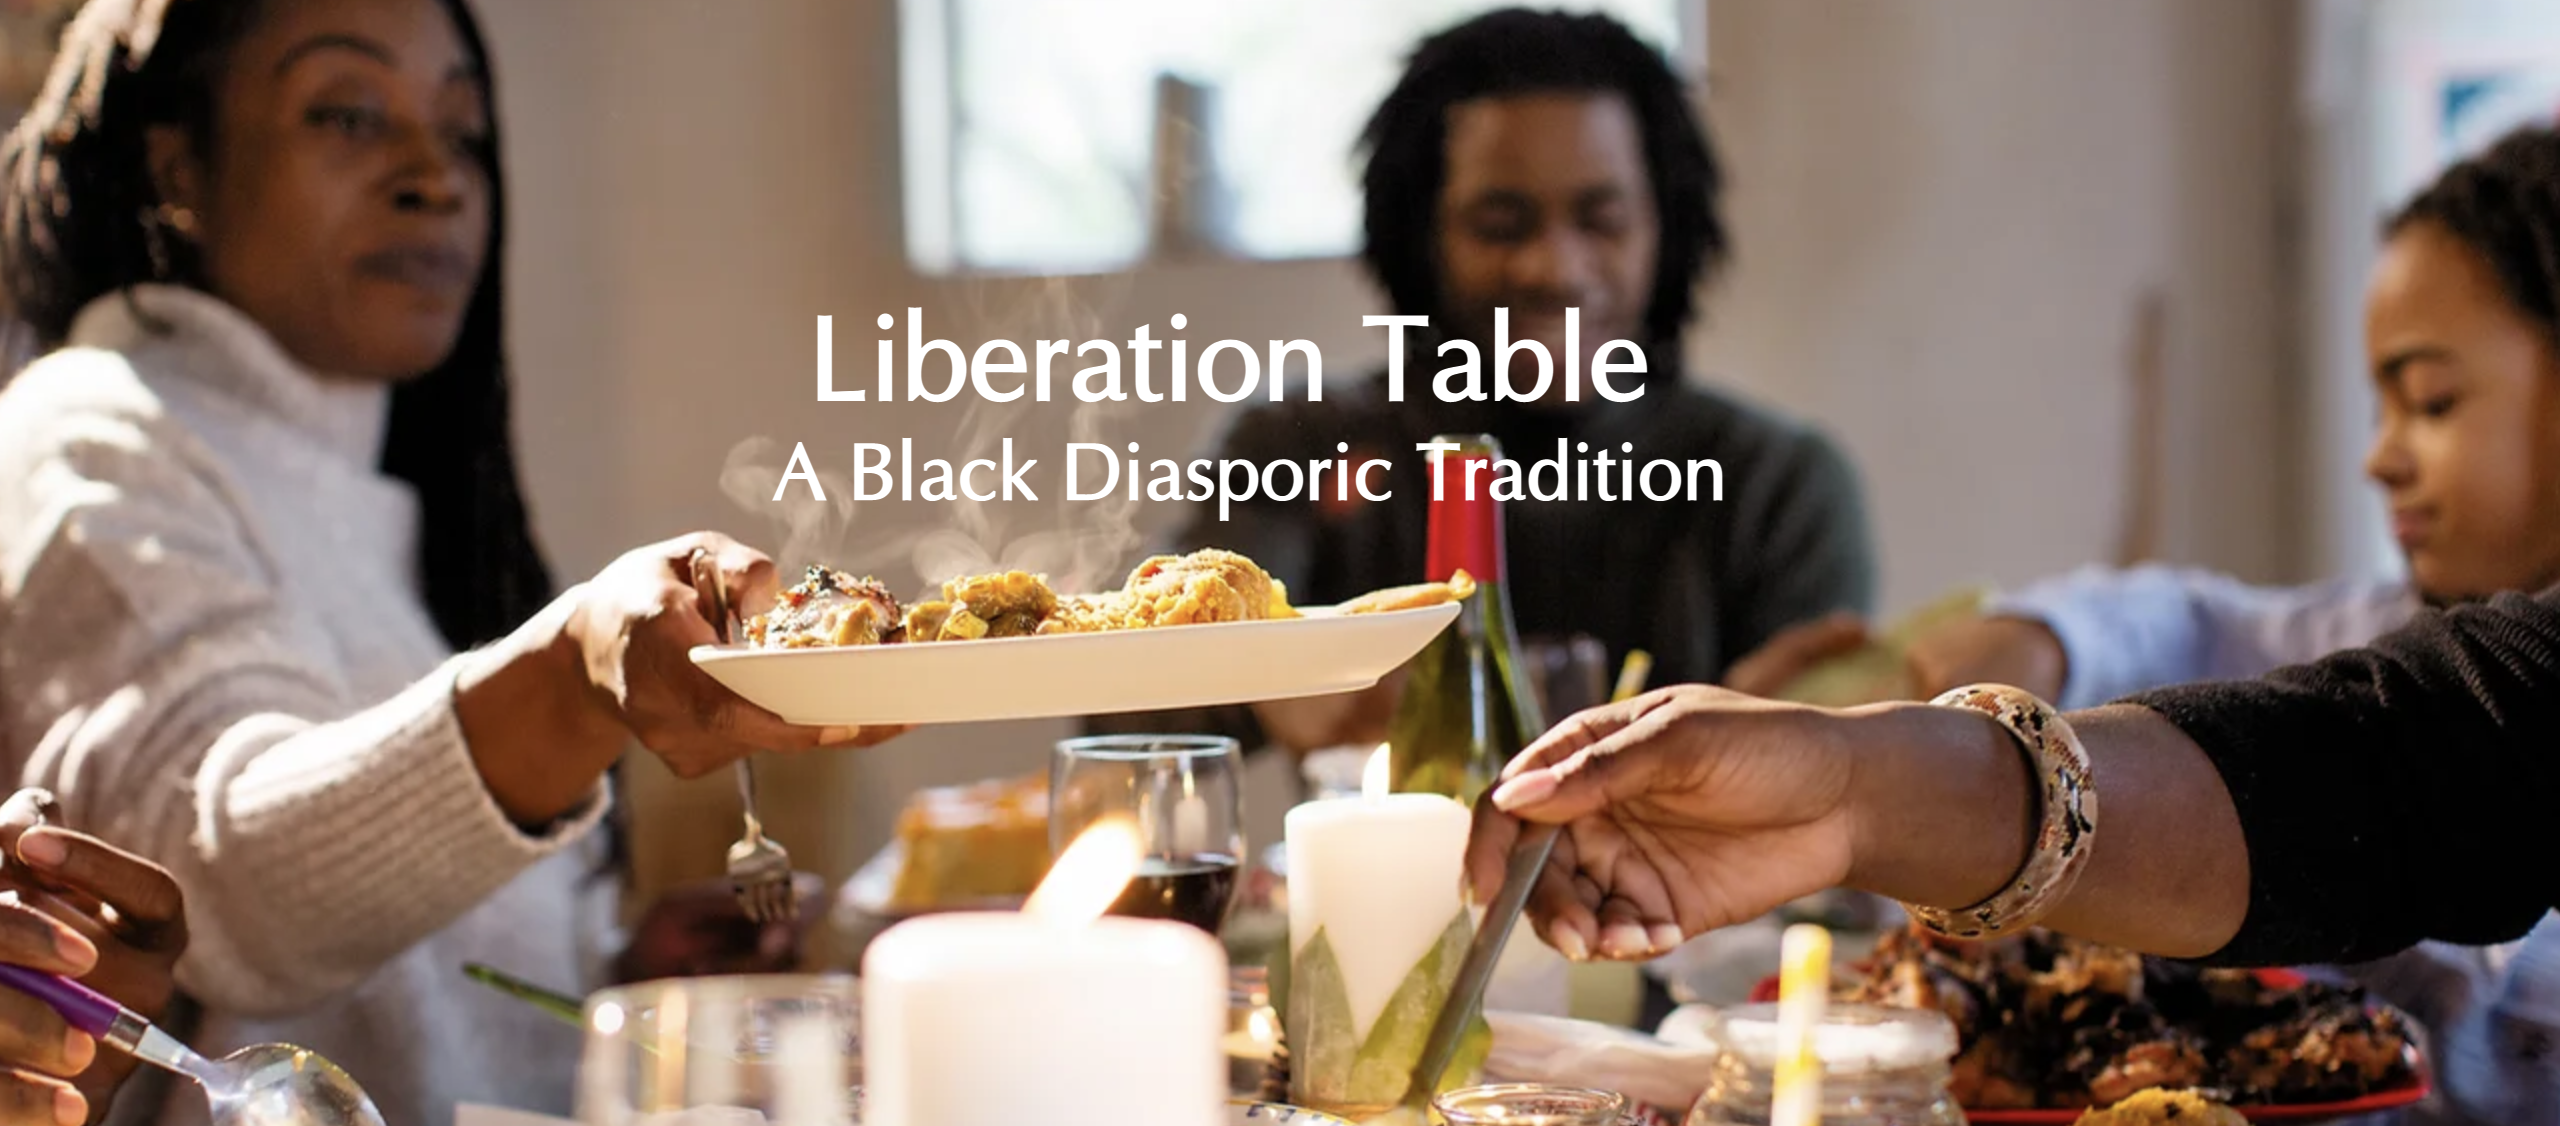 Photo of African-American friends/family around a dinner table with "Liberation Table: A Black Diasporic Tradition" in white text